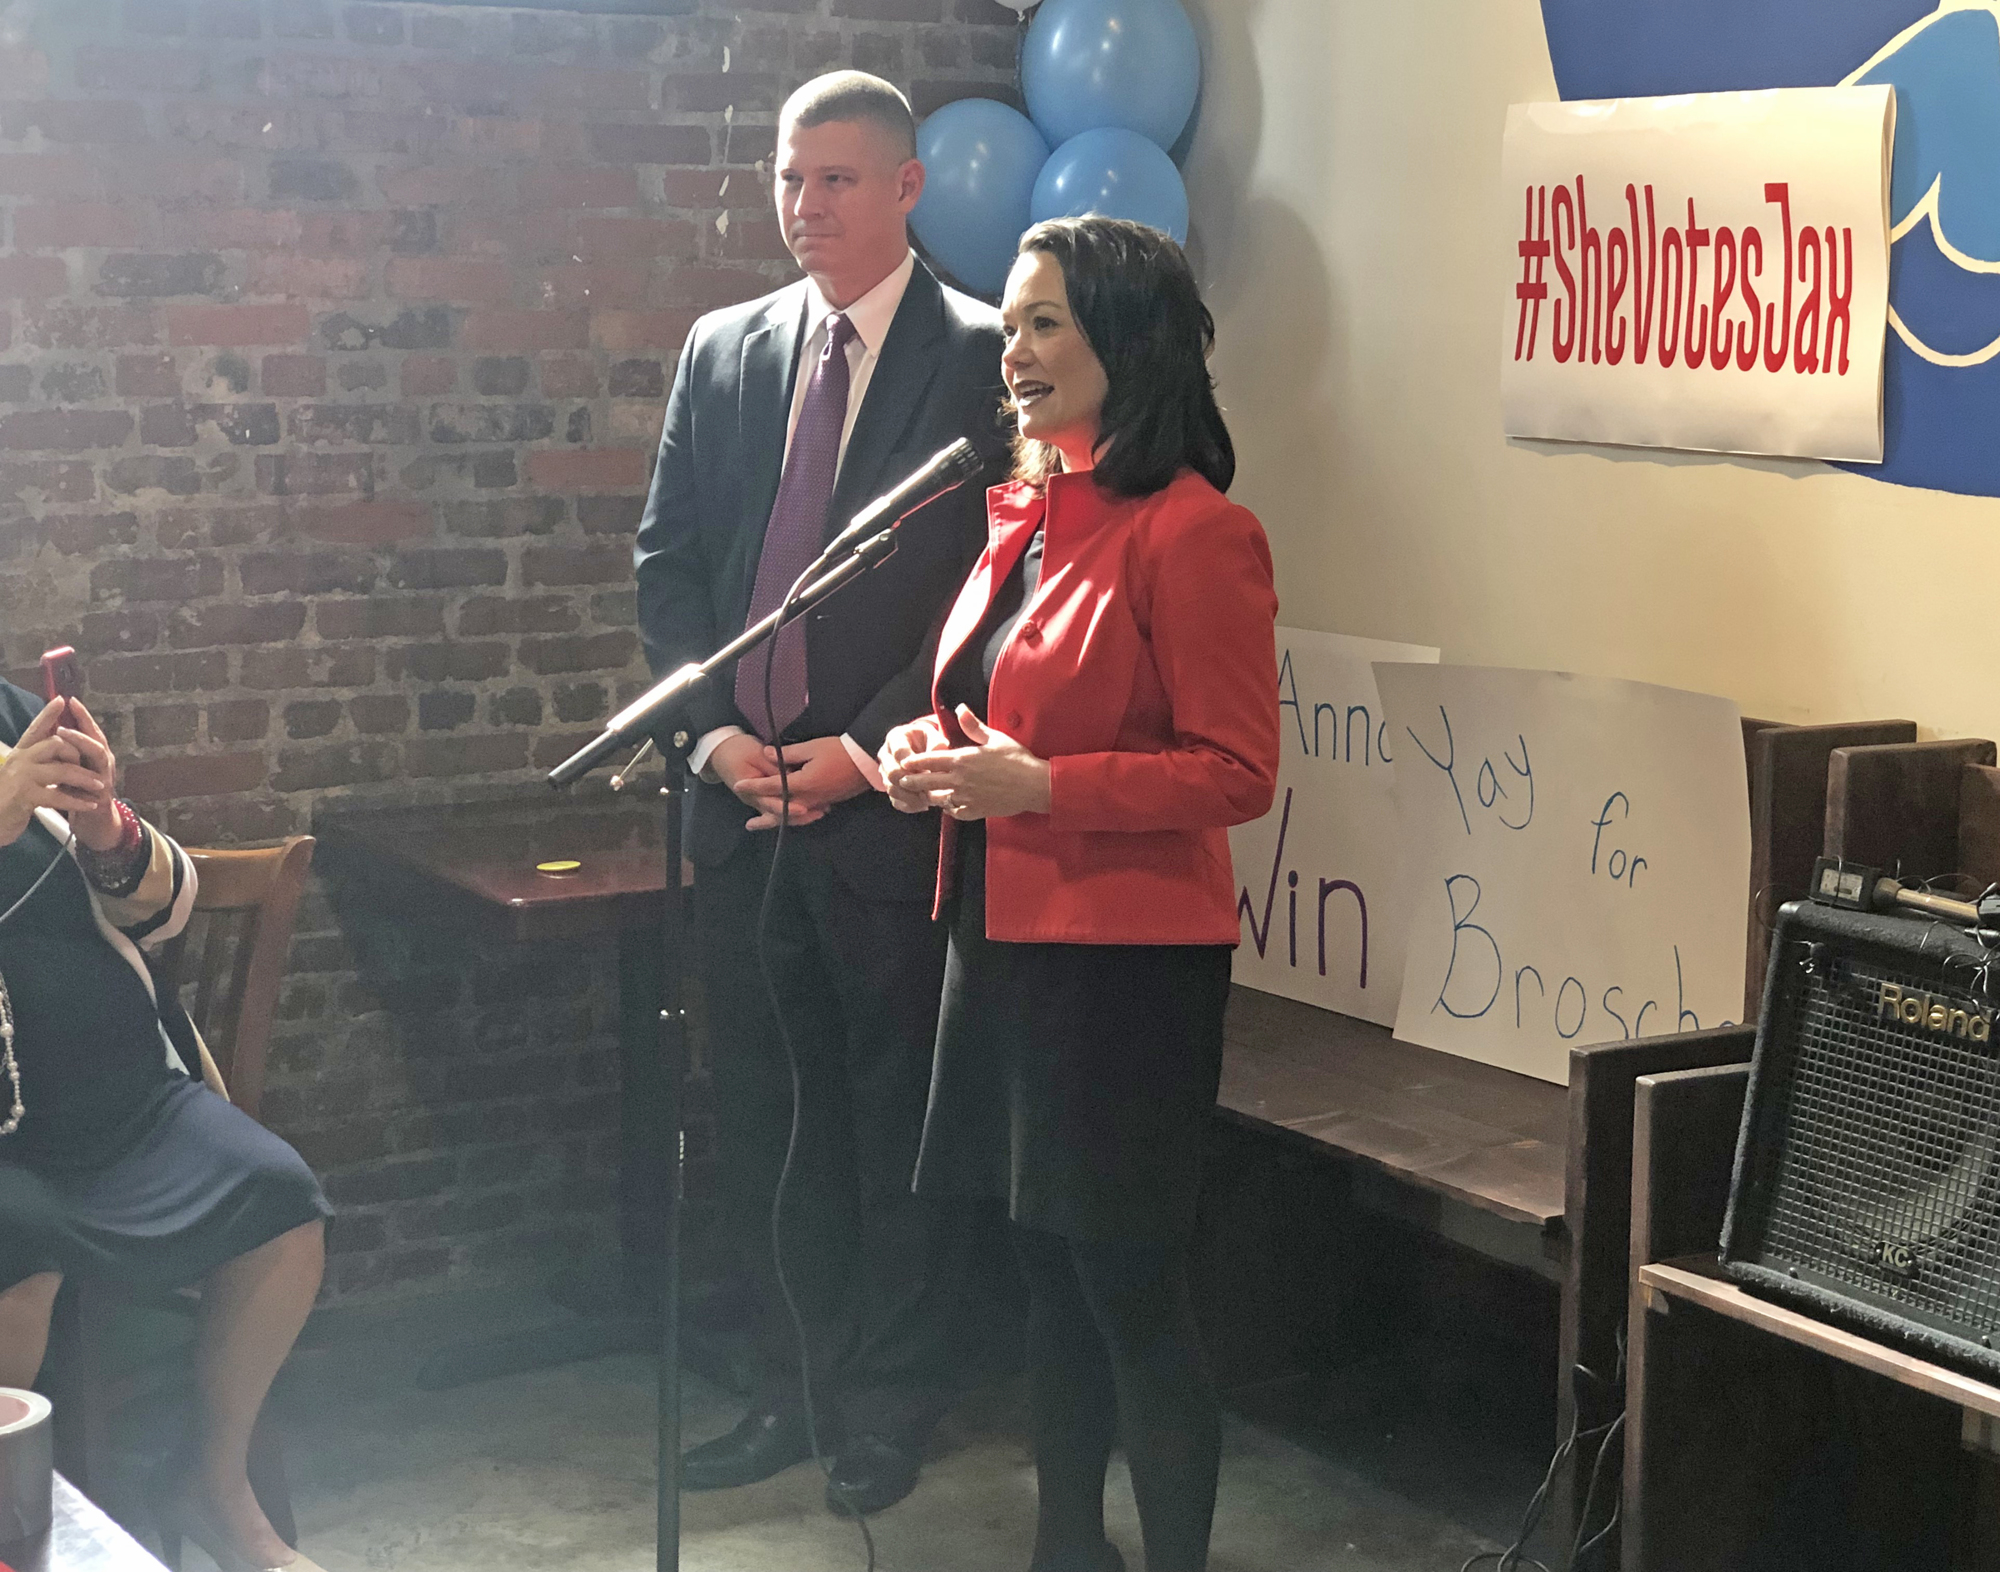 City Council member Anna Lopez Brosche announces her bid for mayor while her husband, Dave, watches.